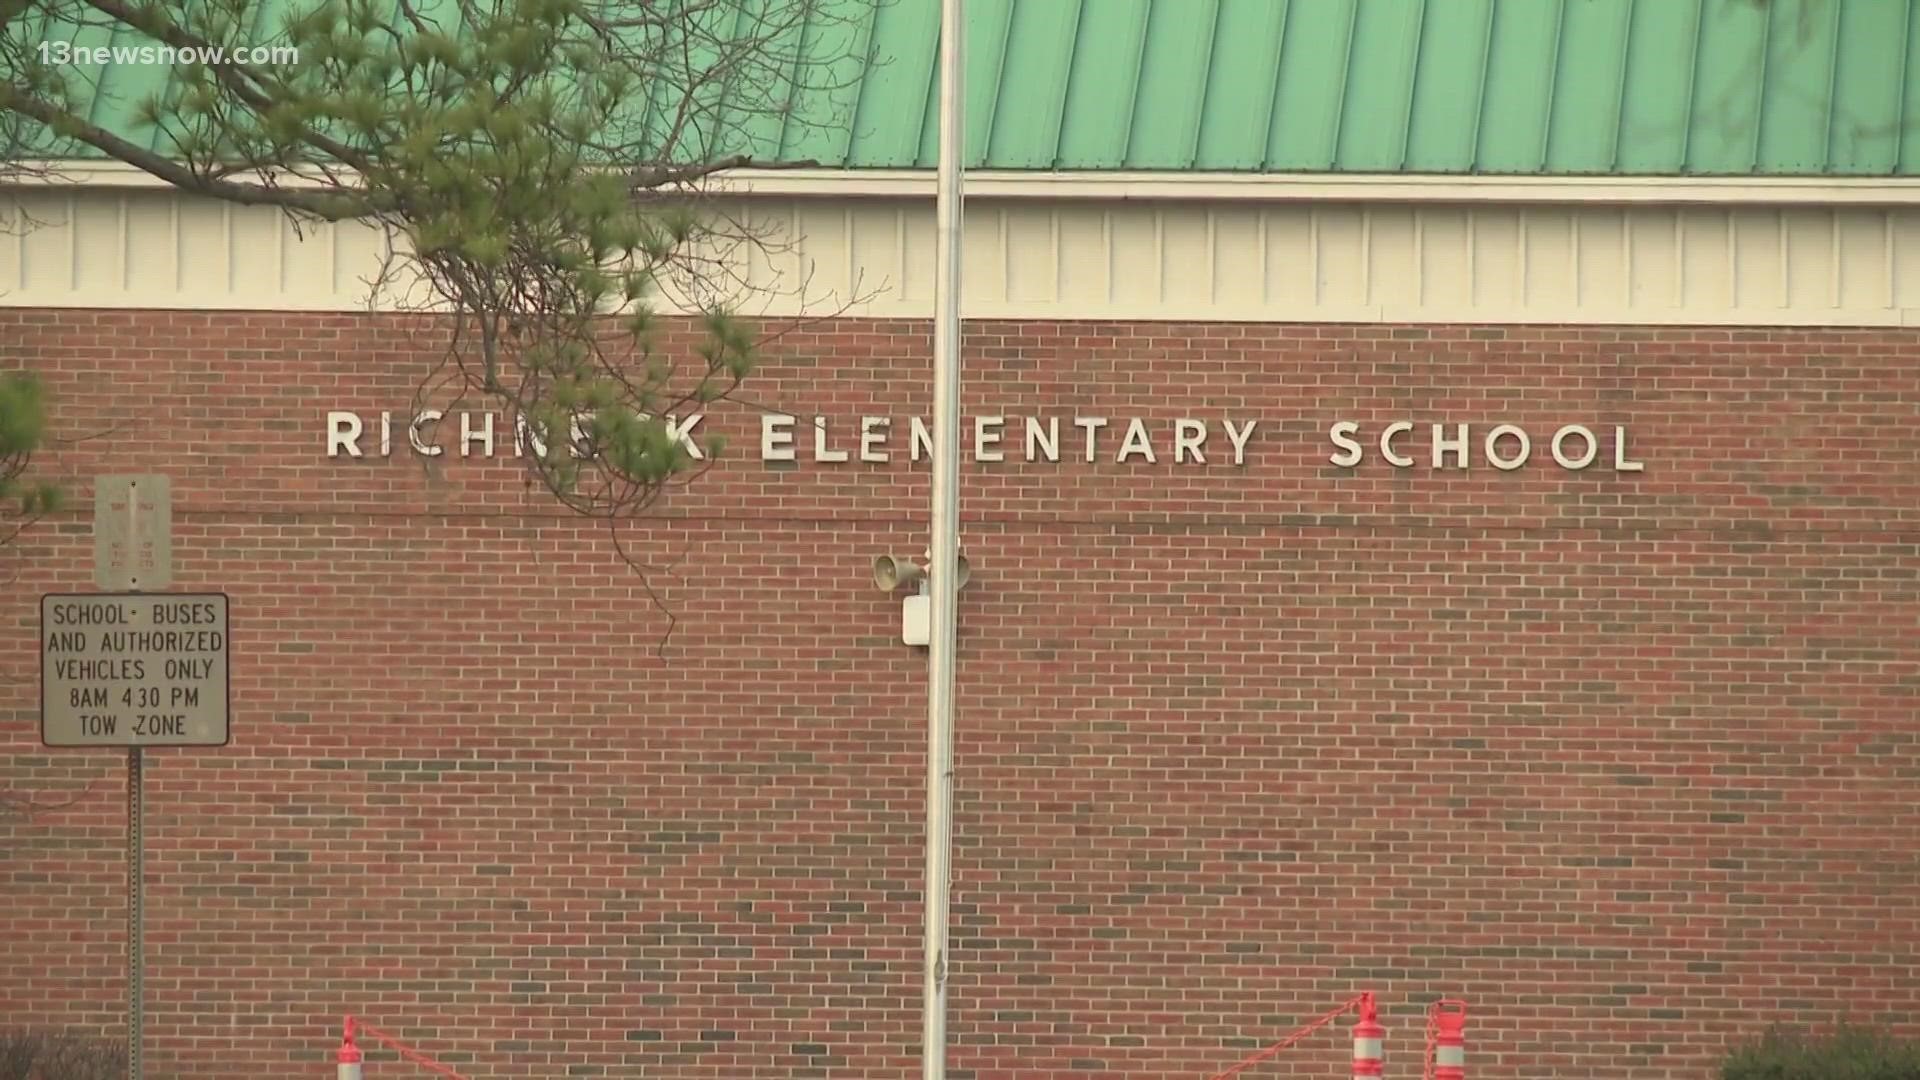 The shooting inside Richneck Elementary left the teacher, 25-year-old Abby Zwerner, critically hurt. Zwerner made progress in recovering and has since been released